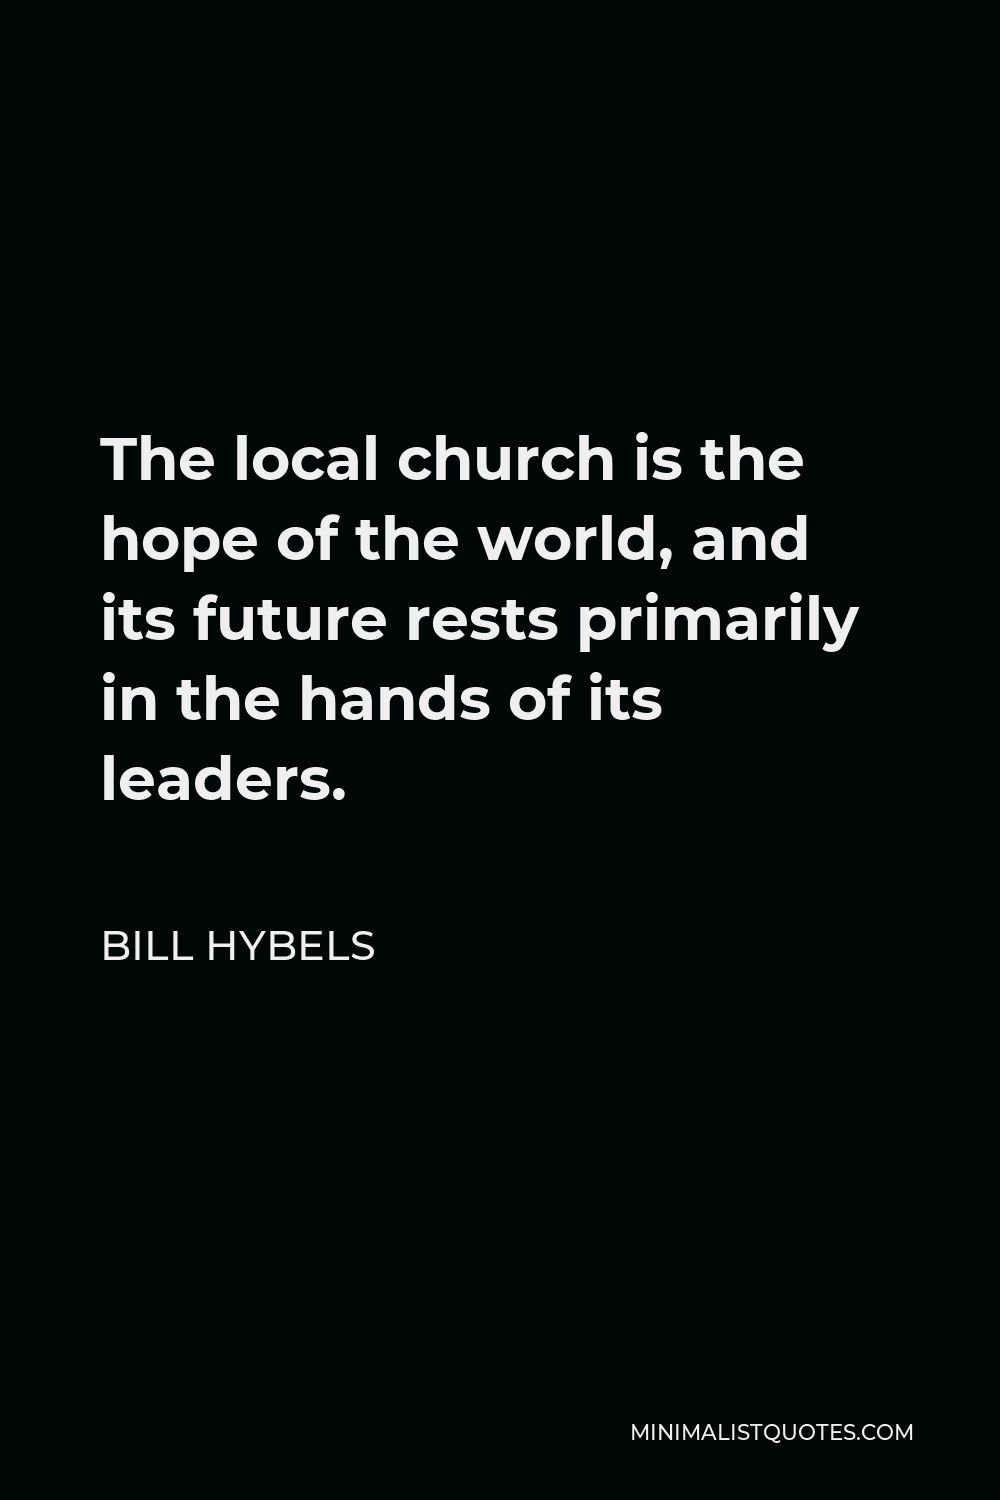 Bill Hybels Quote - The local church is the hope of the world, and its future rests primarily in the hands of its leaders.